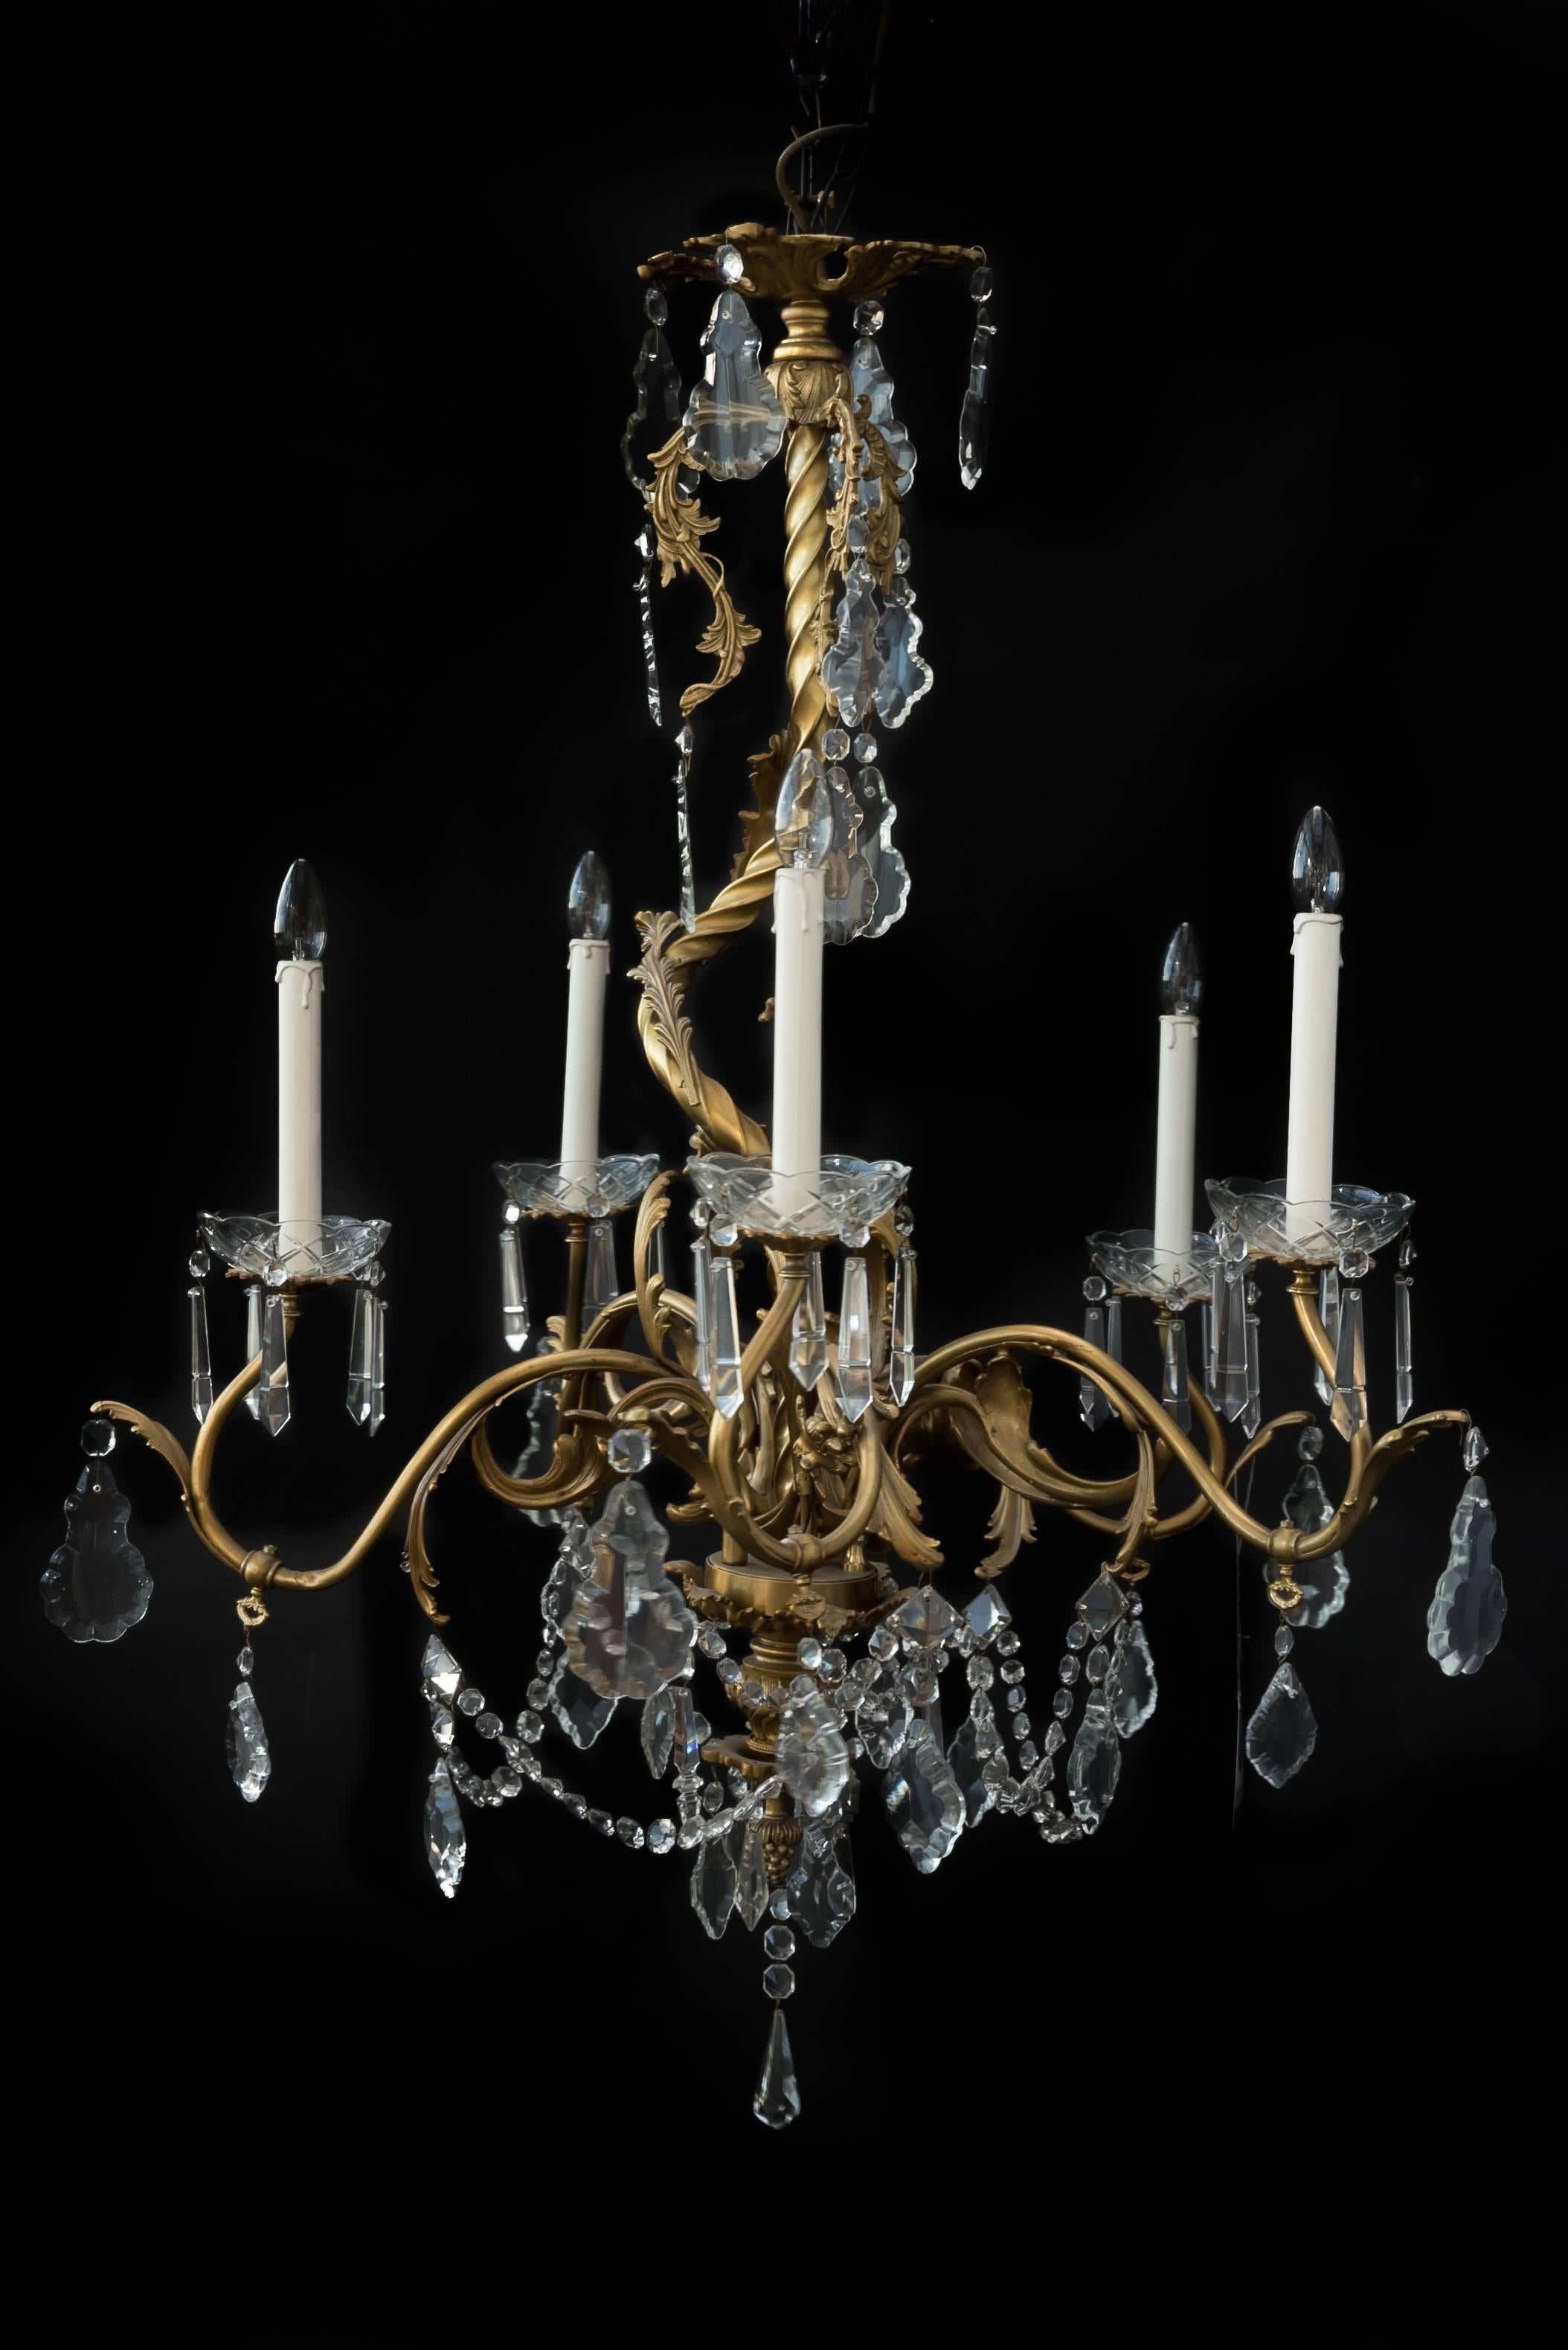 This five lights chandelier was made in Paris, circa 1860 in cast bronze.
The large sparkling crystal parts are hand polished.
Originally intended for gaslight and later converted to electricity.
Rare and unique chandelier.